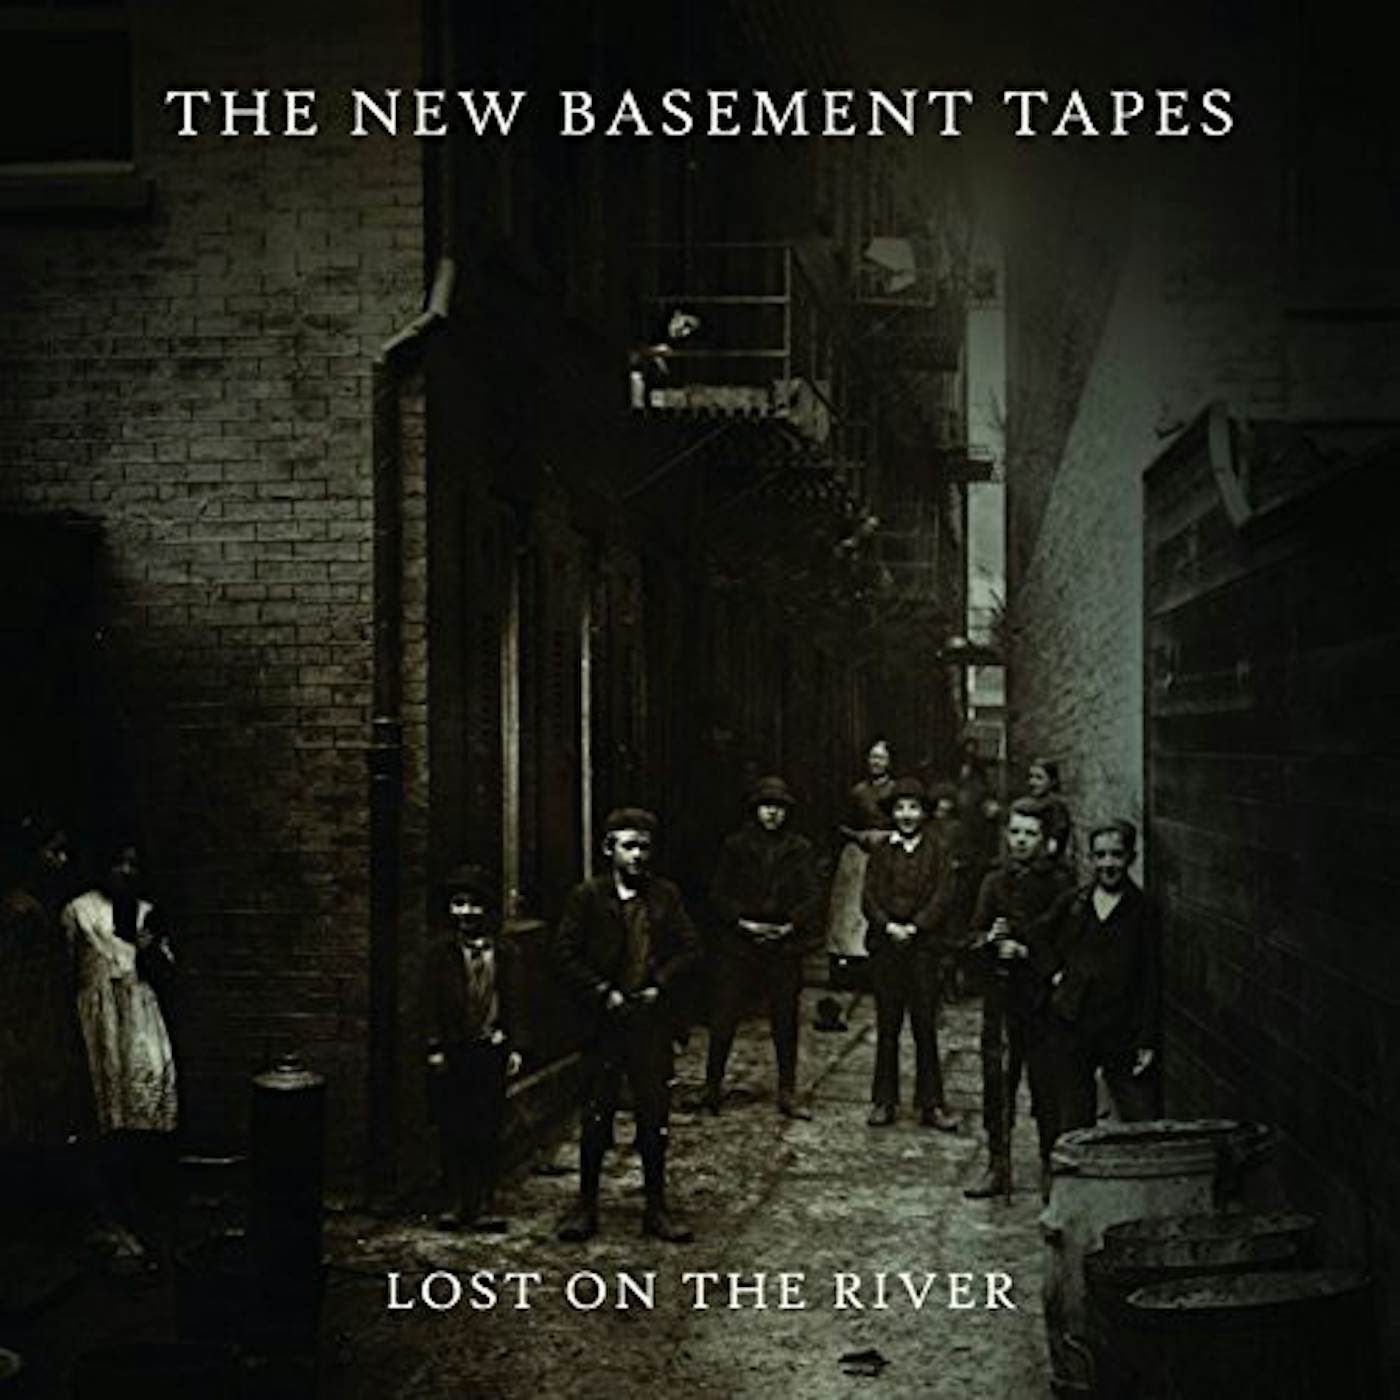 The New Basement Tapes Lost On The River Vinyl Record